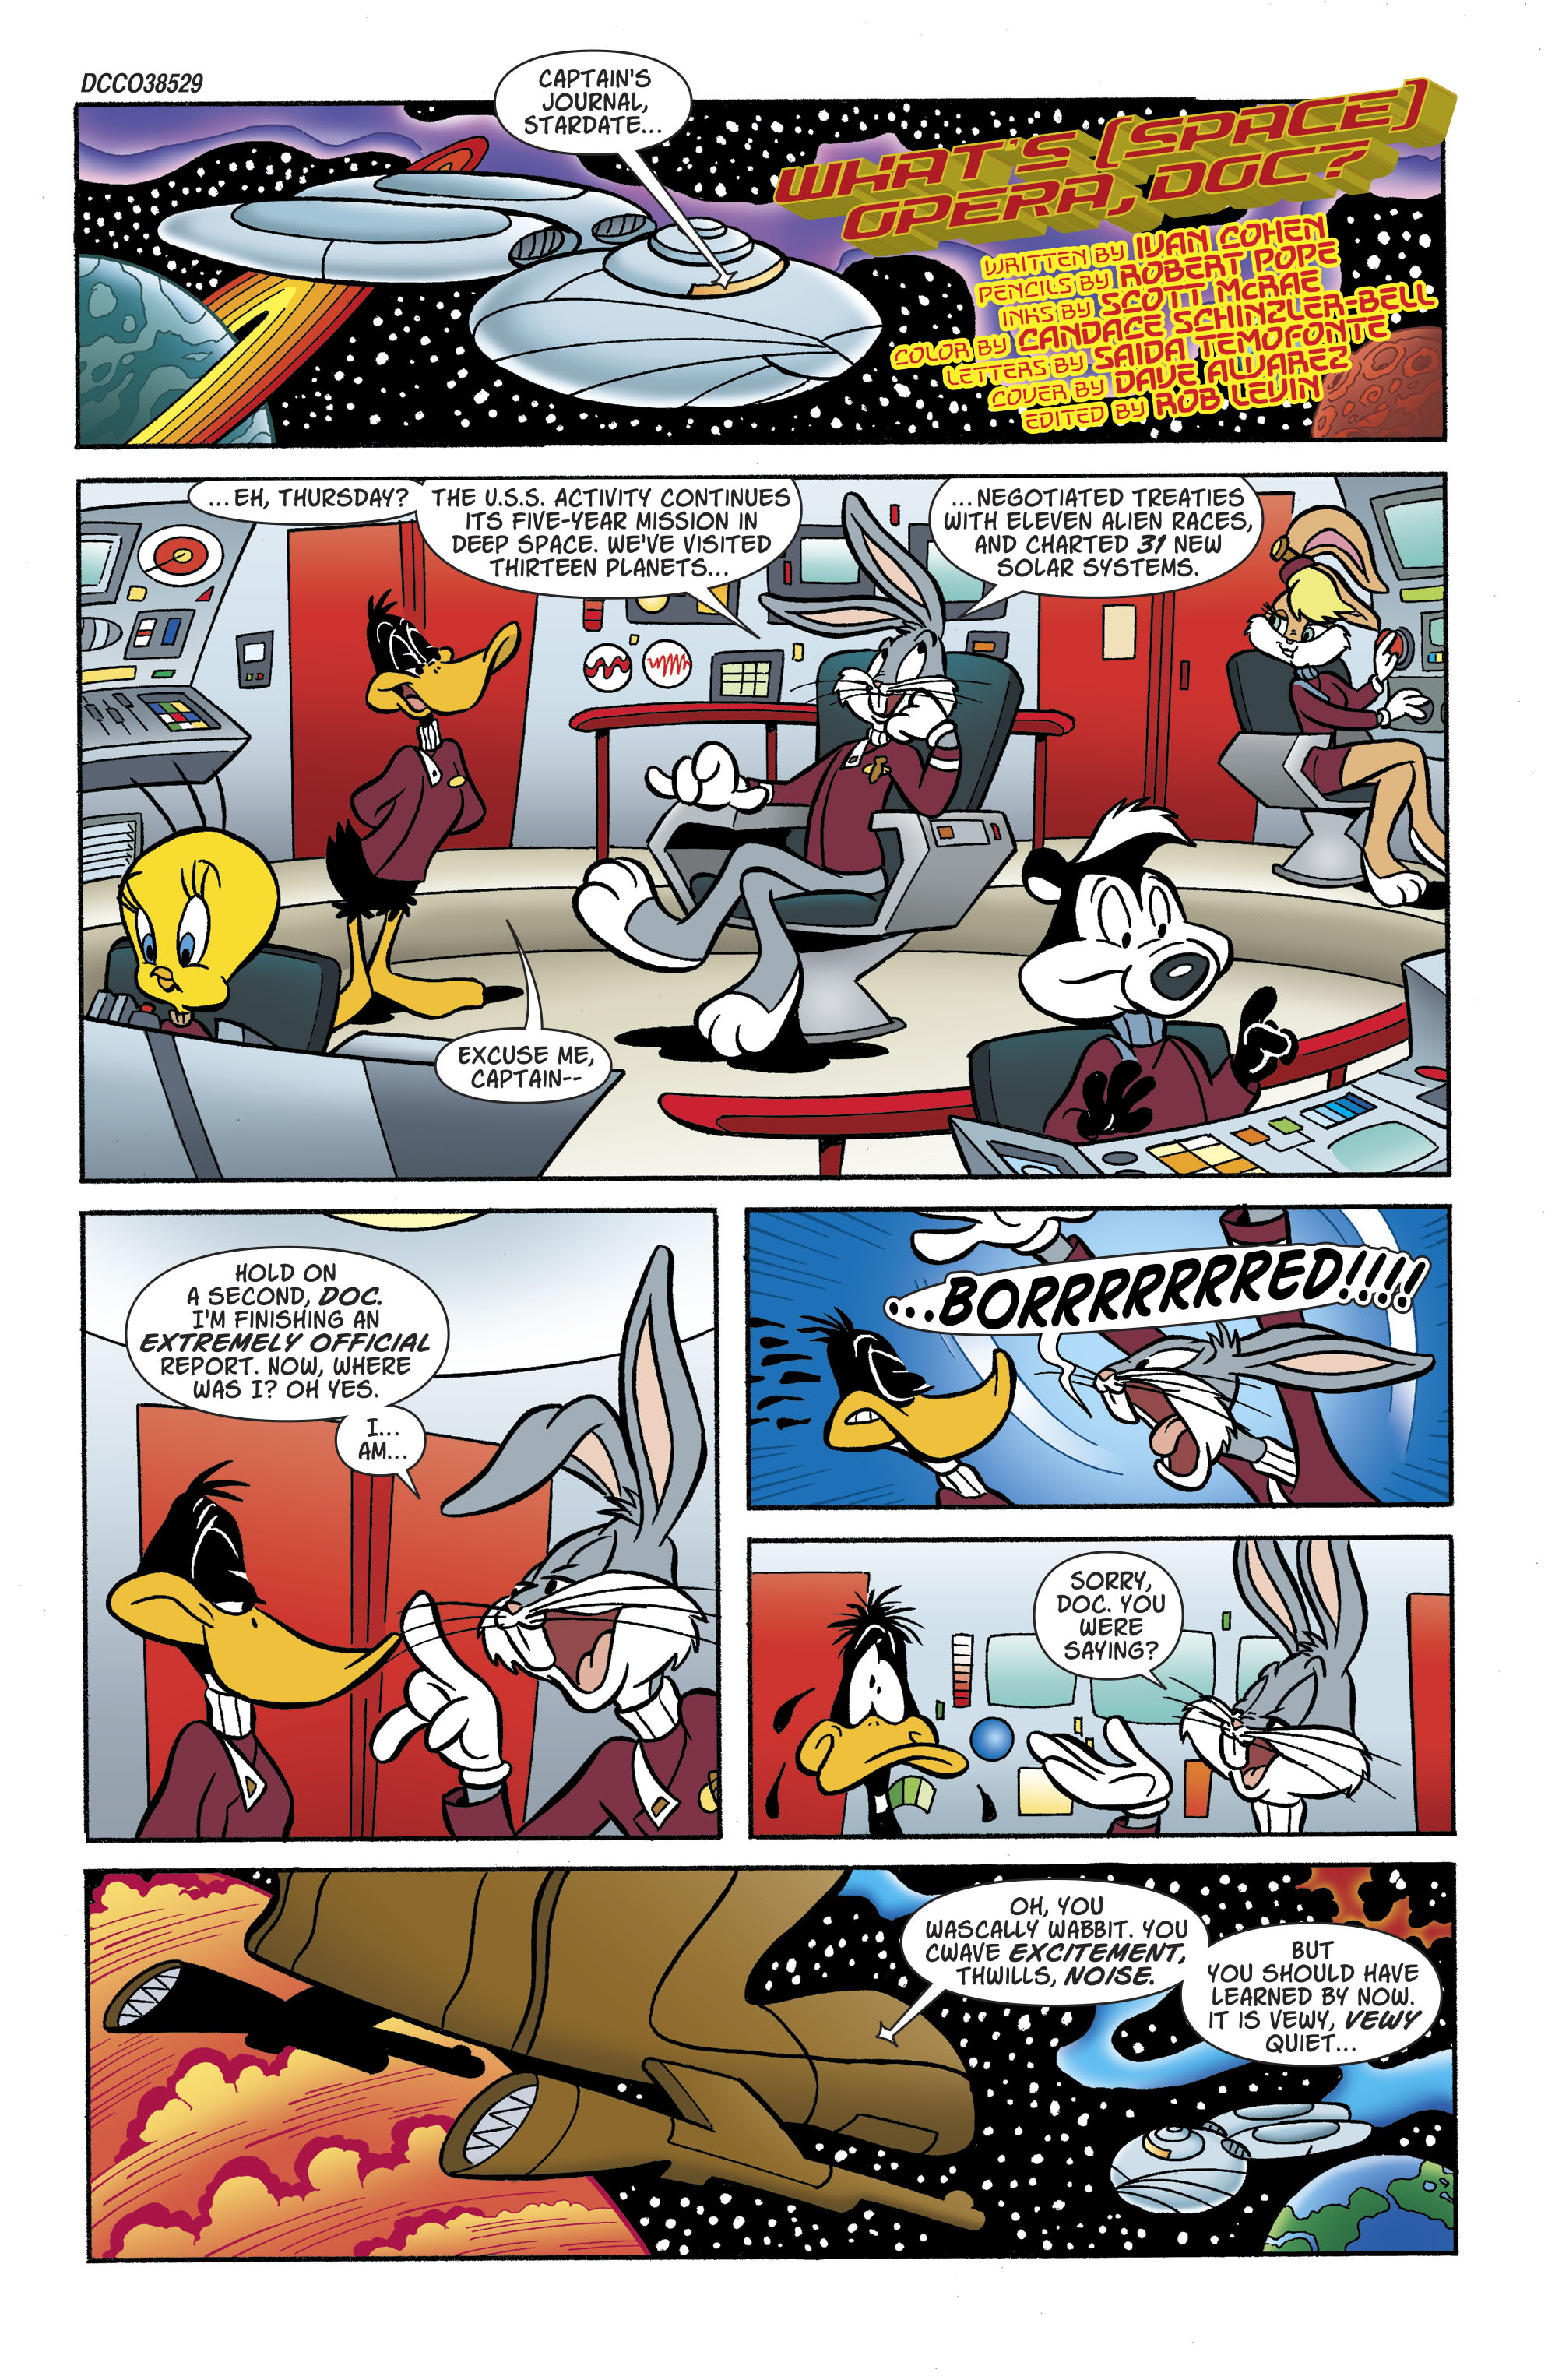 Looney Tunes (1994-): Chapter 239 - Page 2